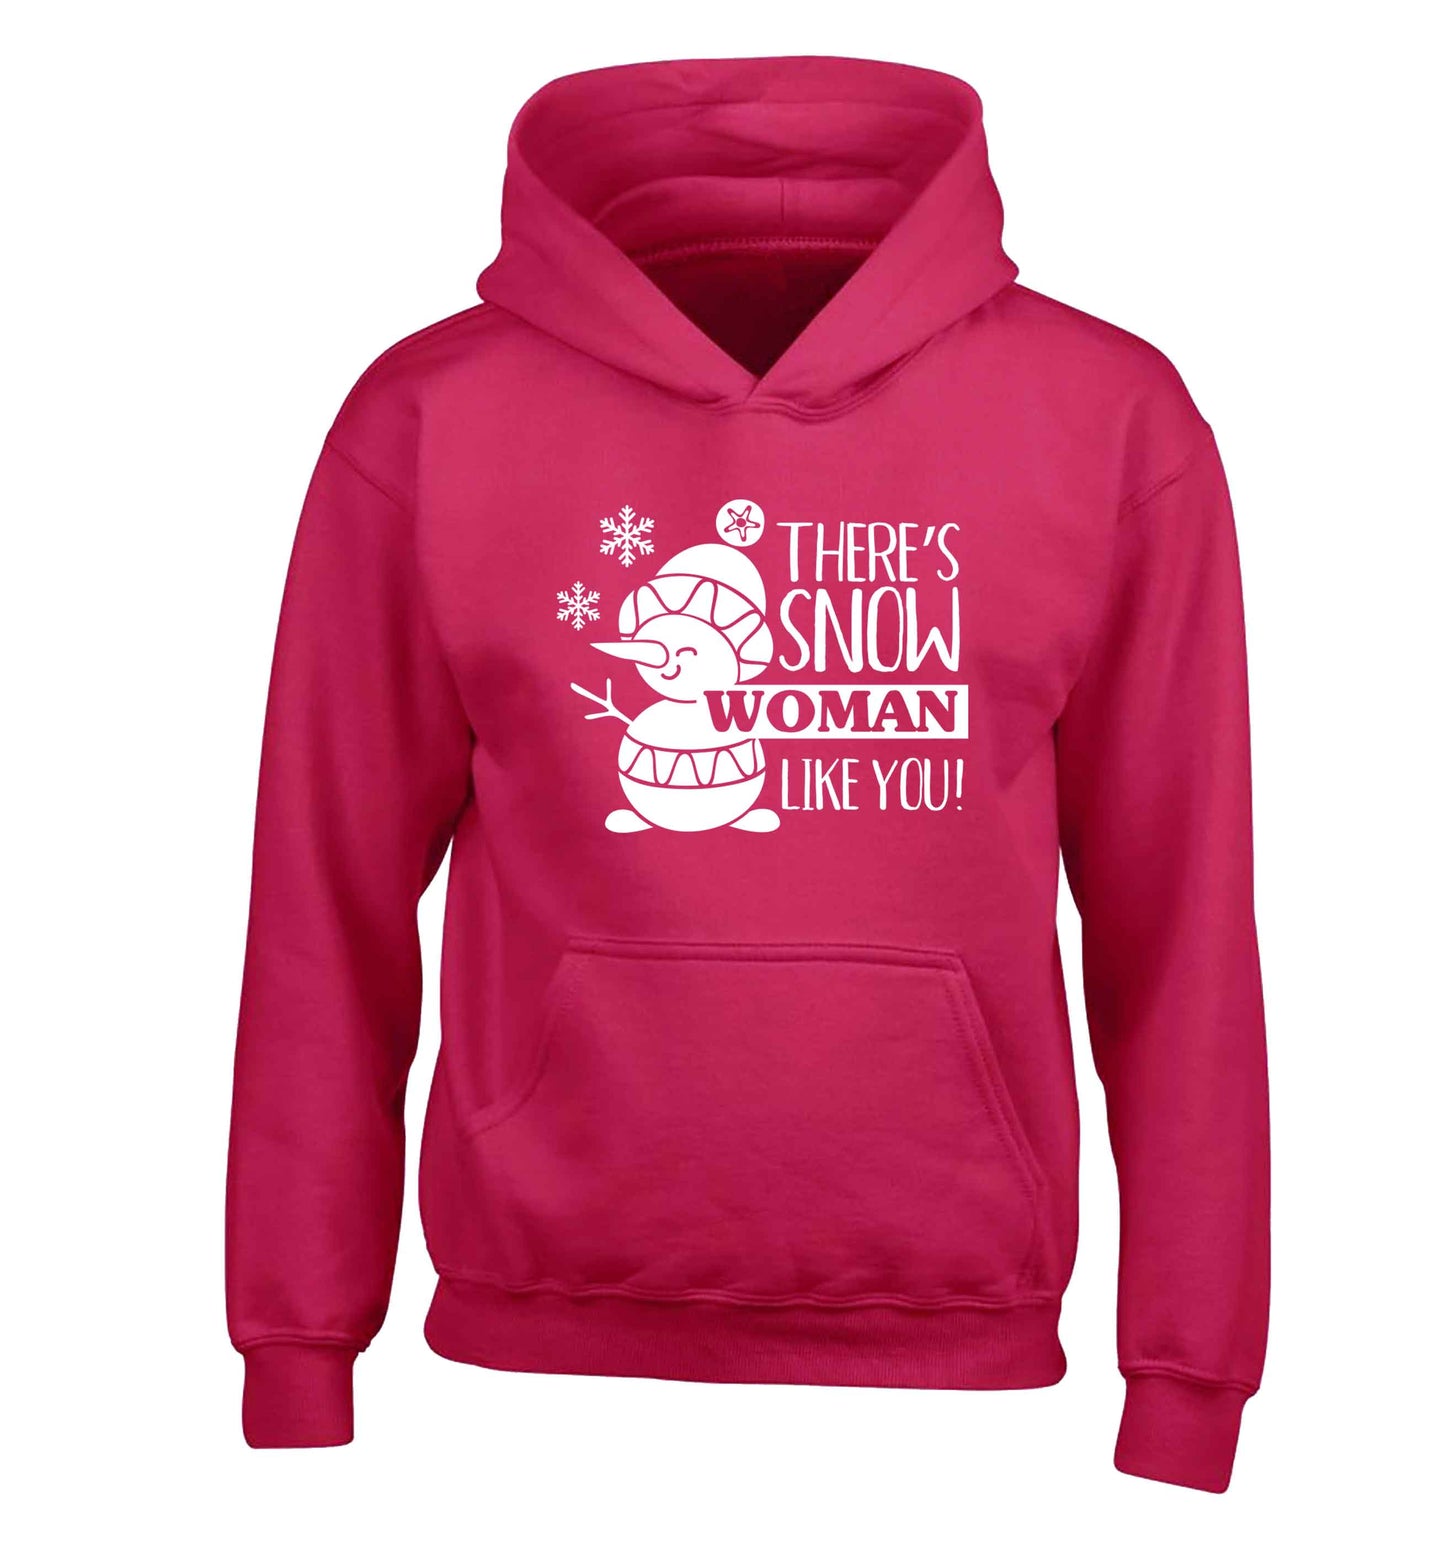 There's snow woman like you children's pink hoodie 12-13 Years